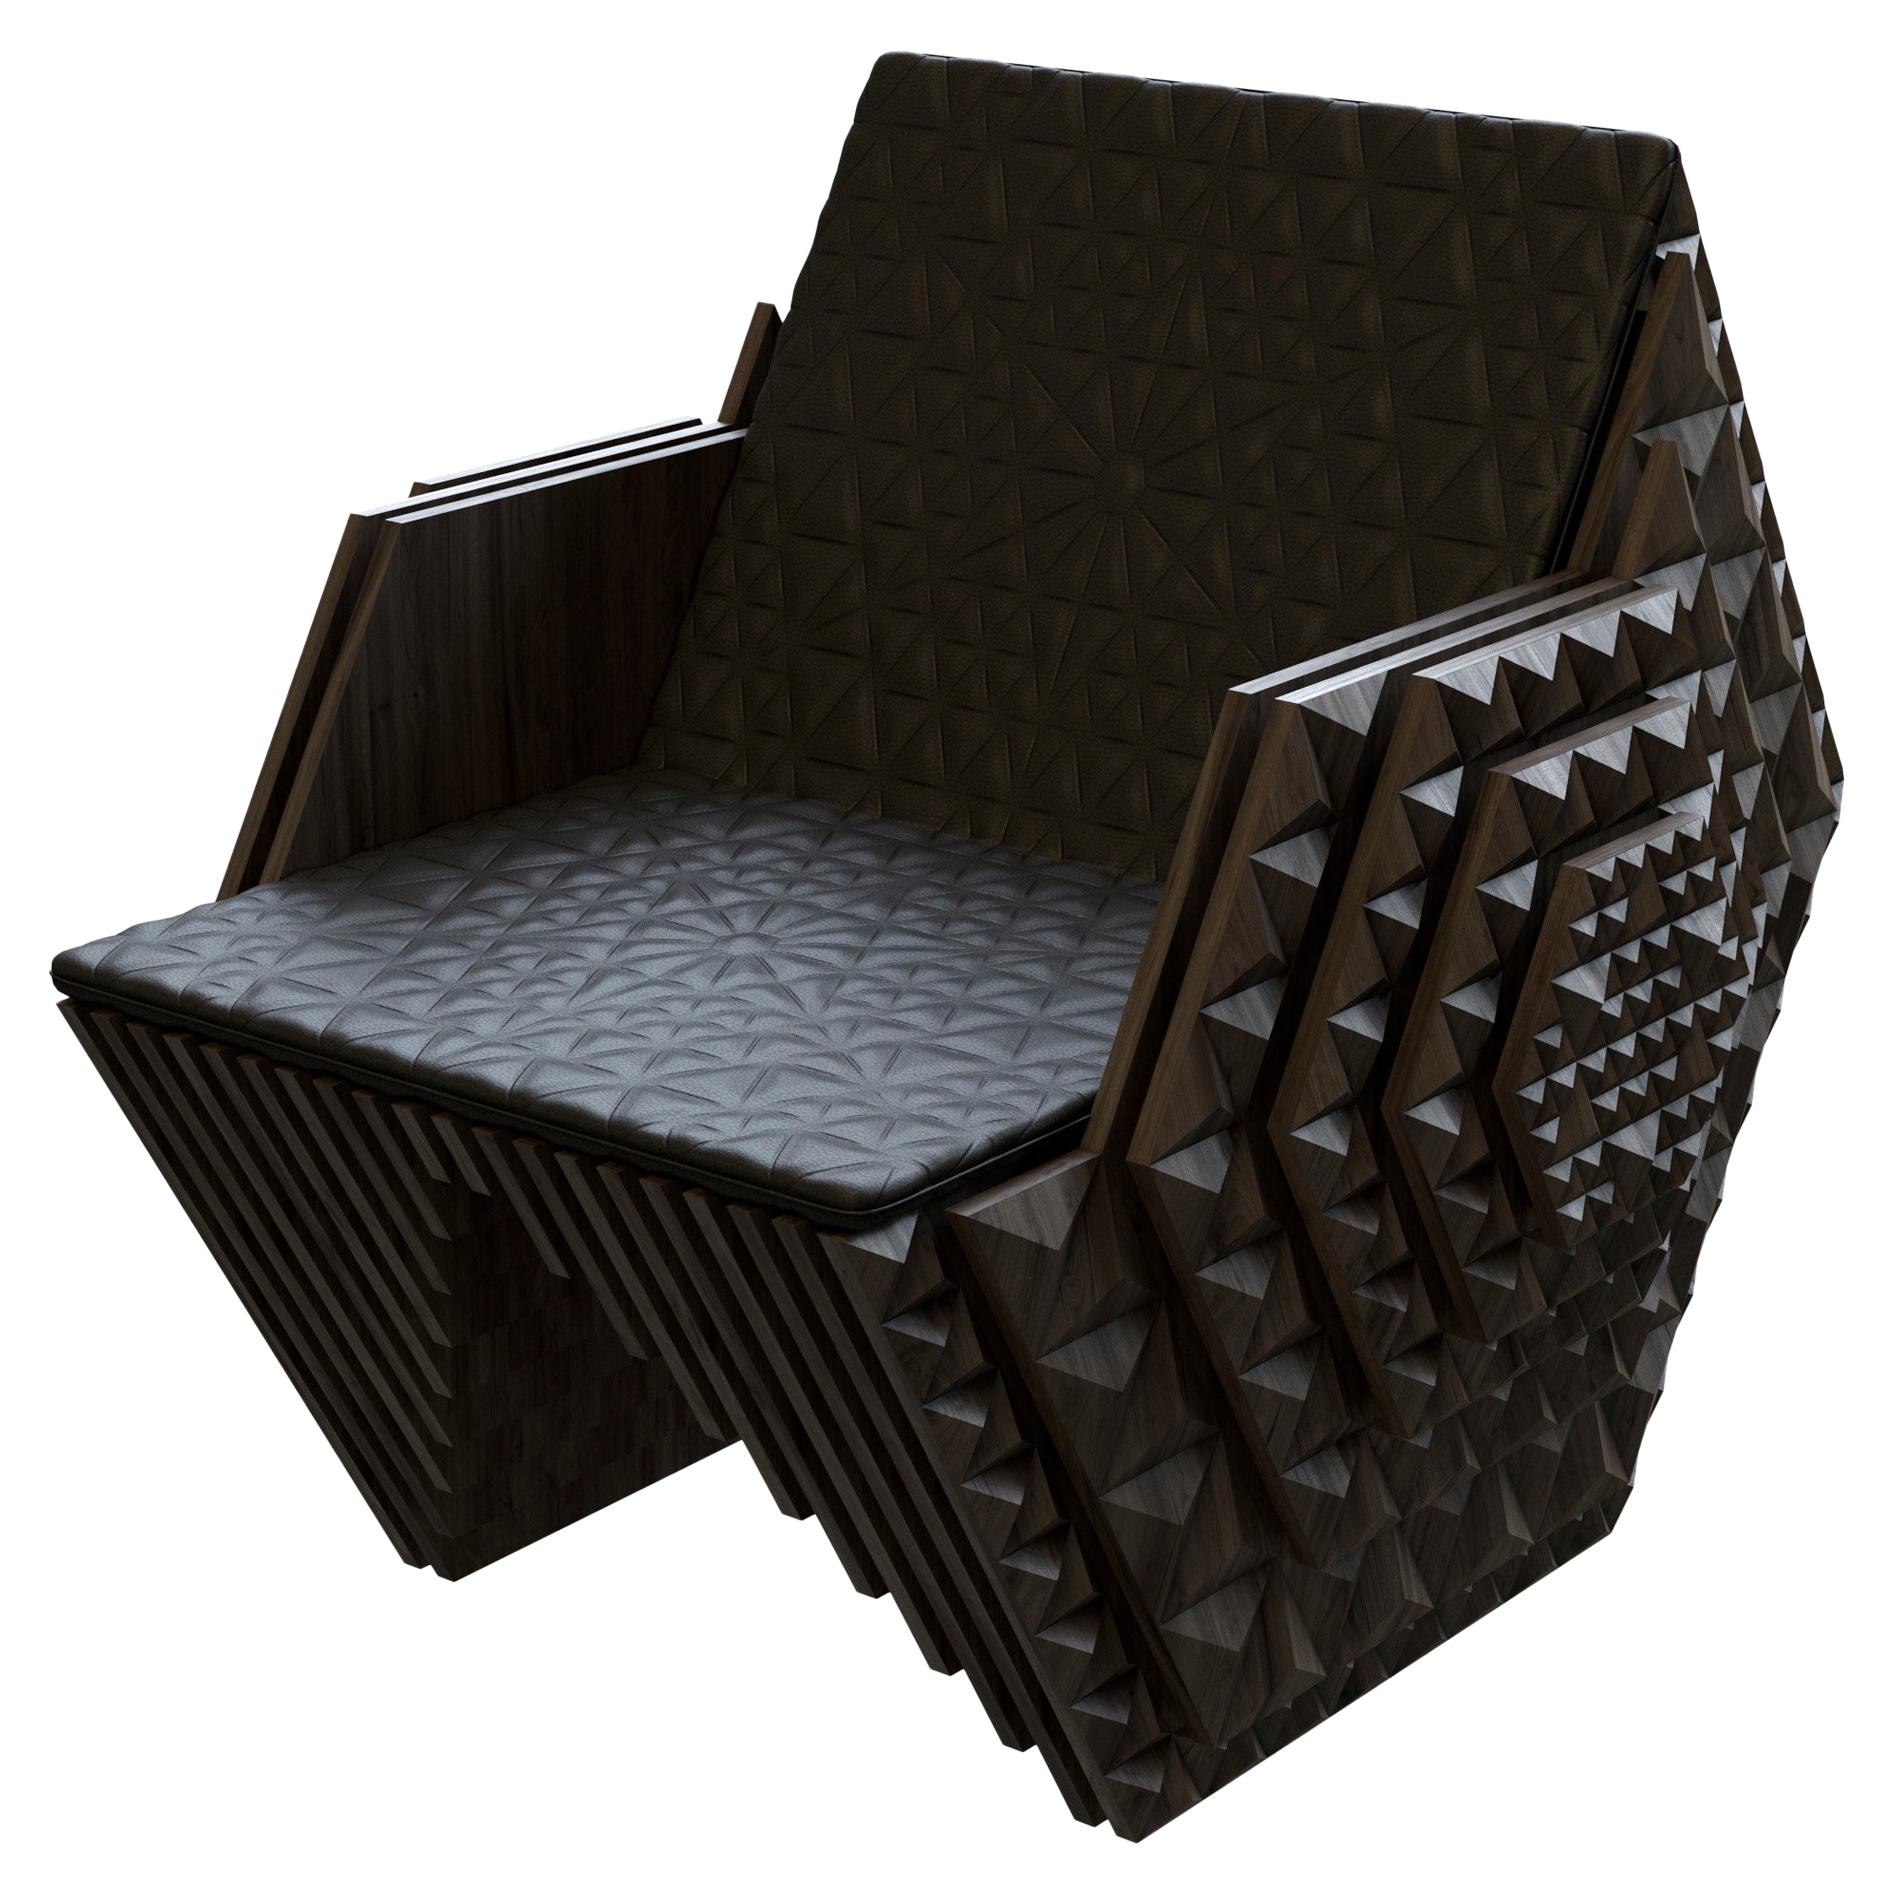 This Viking throne is a limited edition handmade art piece created from solid teak wood. This piece is created in a set of 20 and can be customized to fit your needs. The design was created using a parametric tool and inspired by fractal cosmic